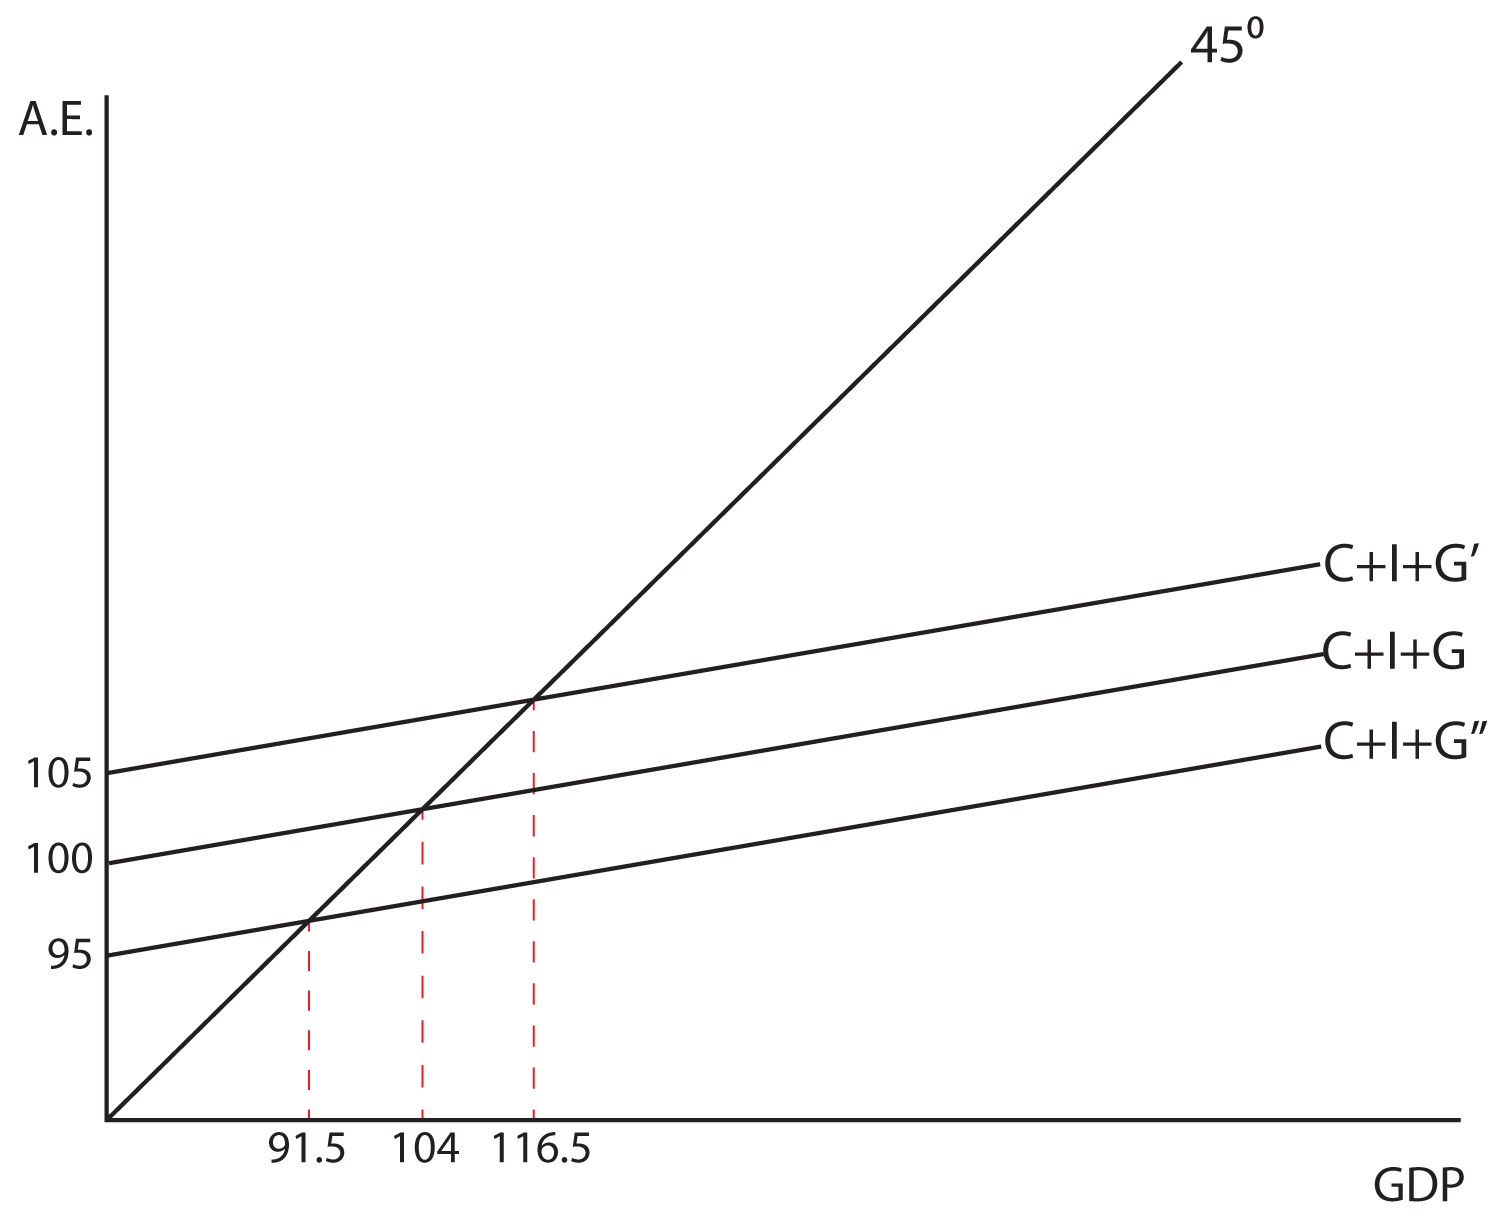 Image 7.10: The image shows a graph. The y axis is labeled A.E. The x axis is labeled GDP. There is a 45 degree line drawn from the origin. There are three lines drawn from the y axis, the first starts at 95 units on the y axis and has a slope of C+I+G double quote and it intersects the 45 degree line at 91.5 units on the x axis, the second starts at 100 units on the y axis and has a slope of C+I+G and it intersects the 45 degree line at 104 units on the x axis, the third starts at 105 units on the y axis and has a slope of C+I+G single quote and it intersects the 45 degree line at 116.5 units on the x axis.